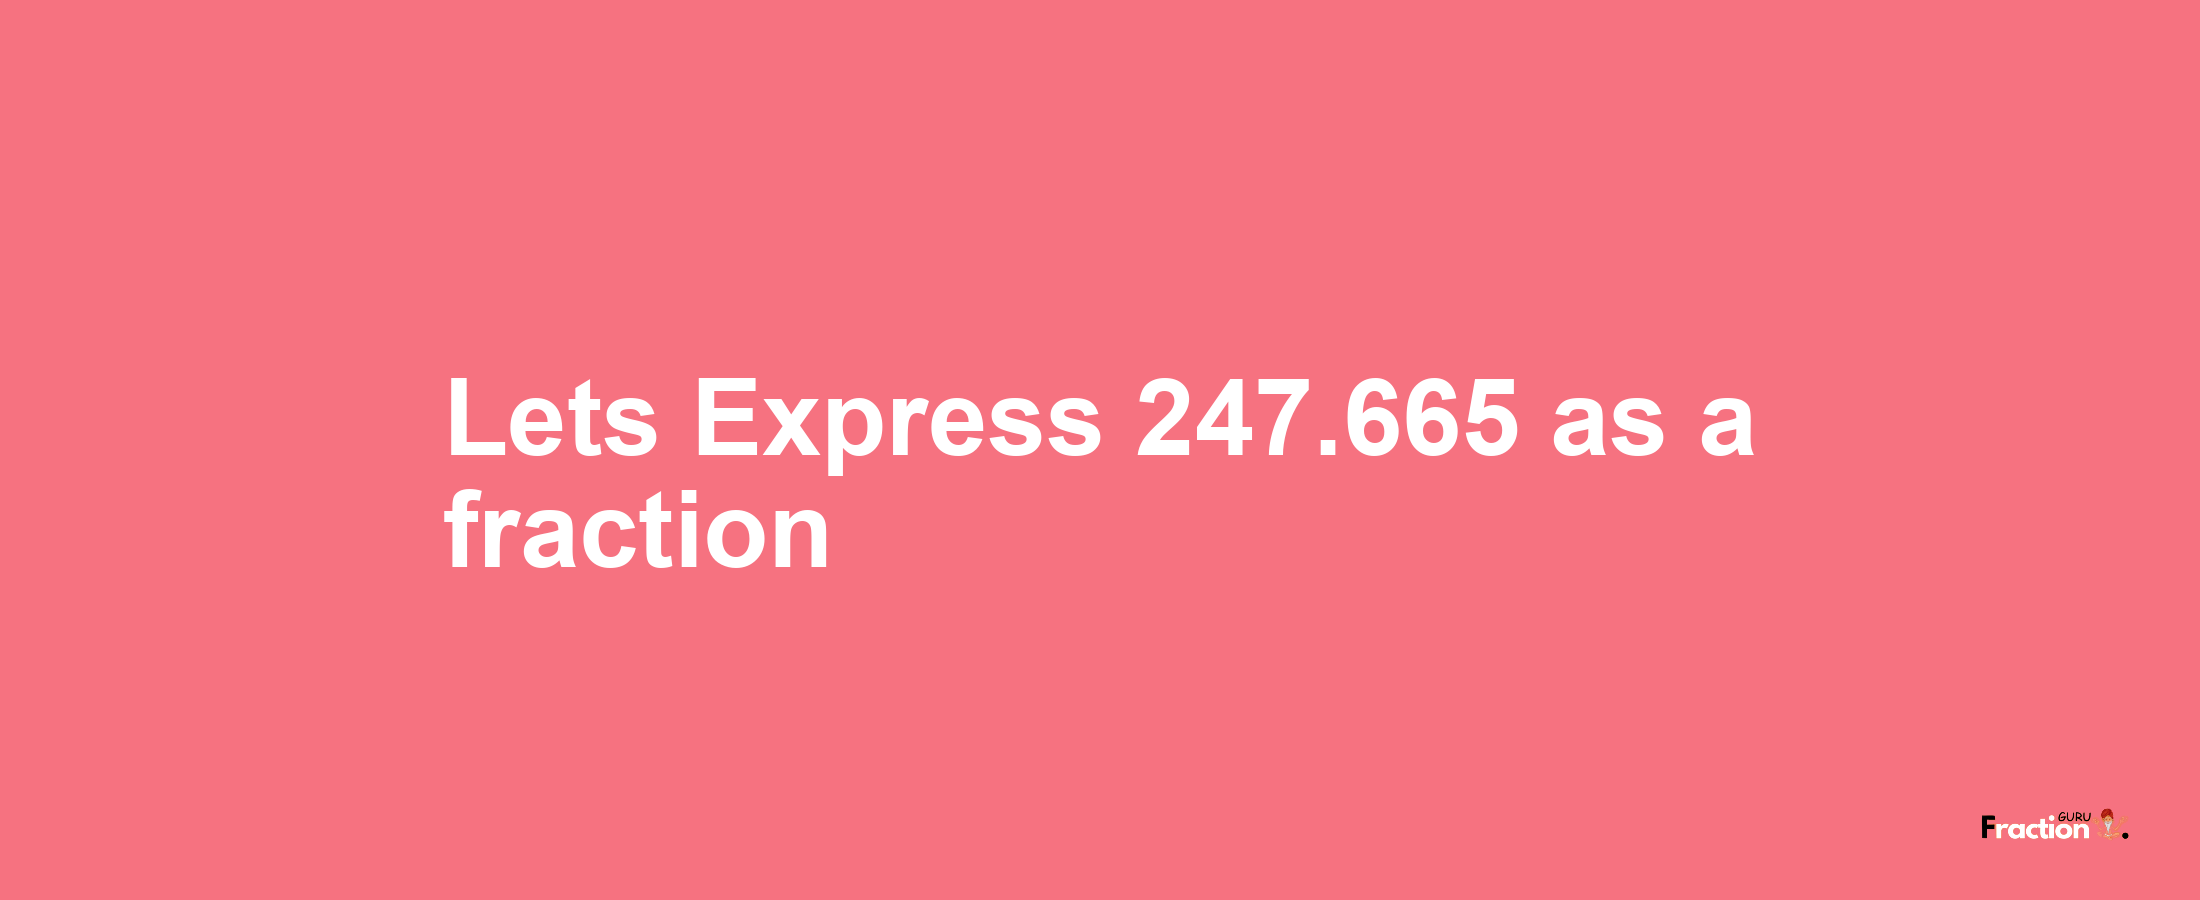 Lets Express 247.665 as afraction